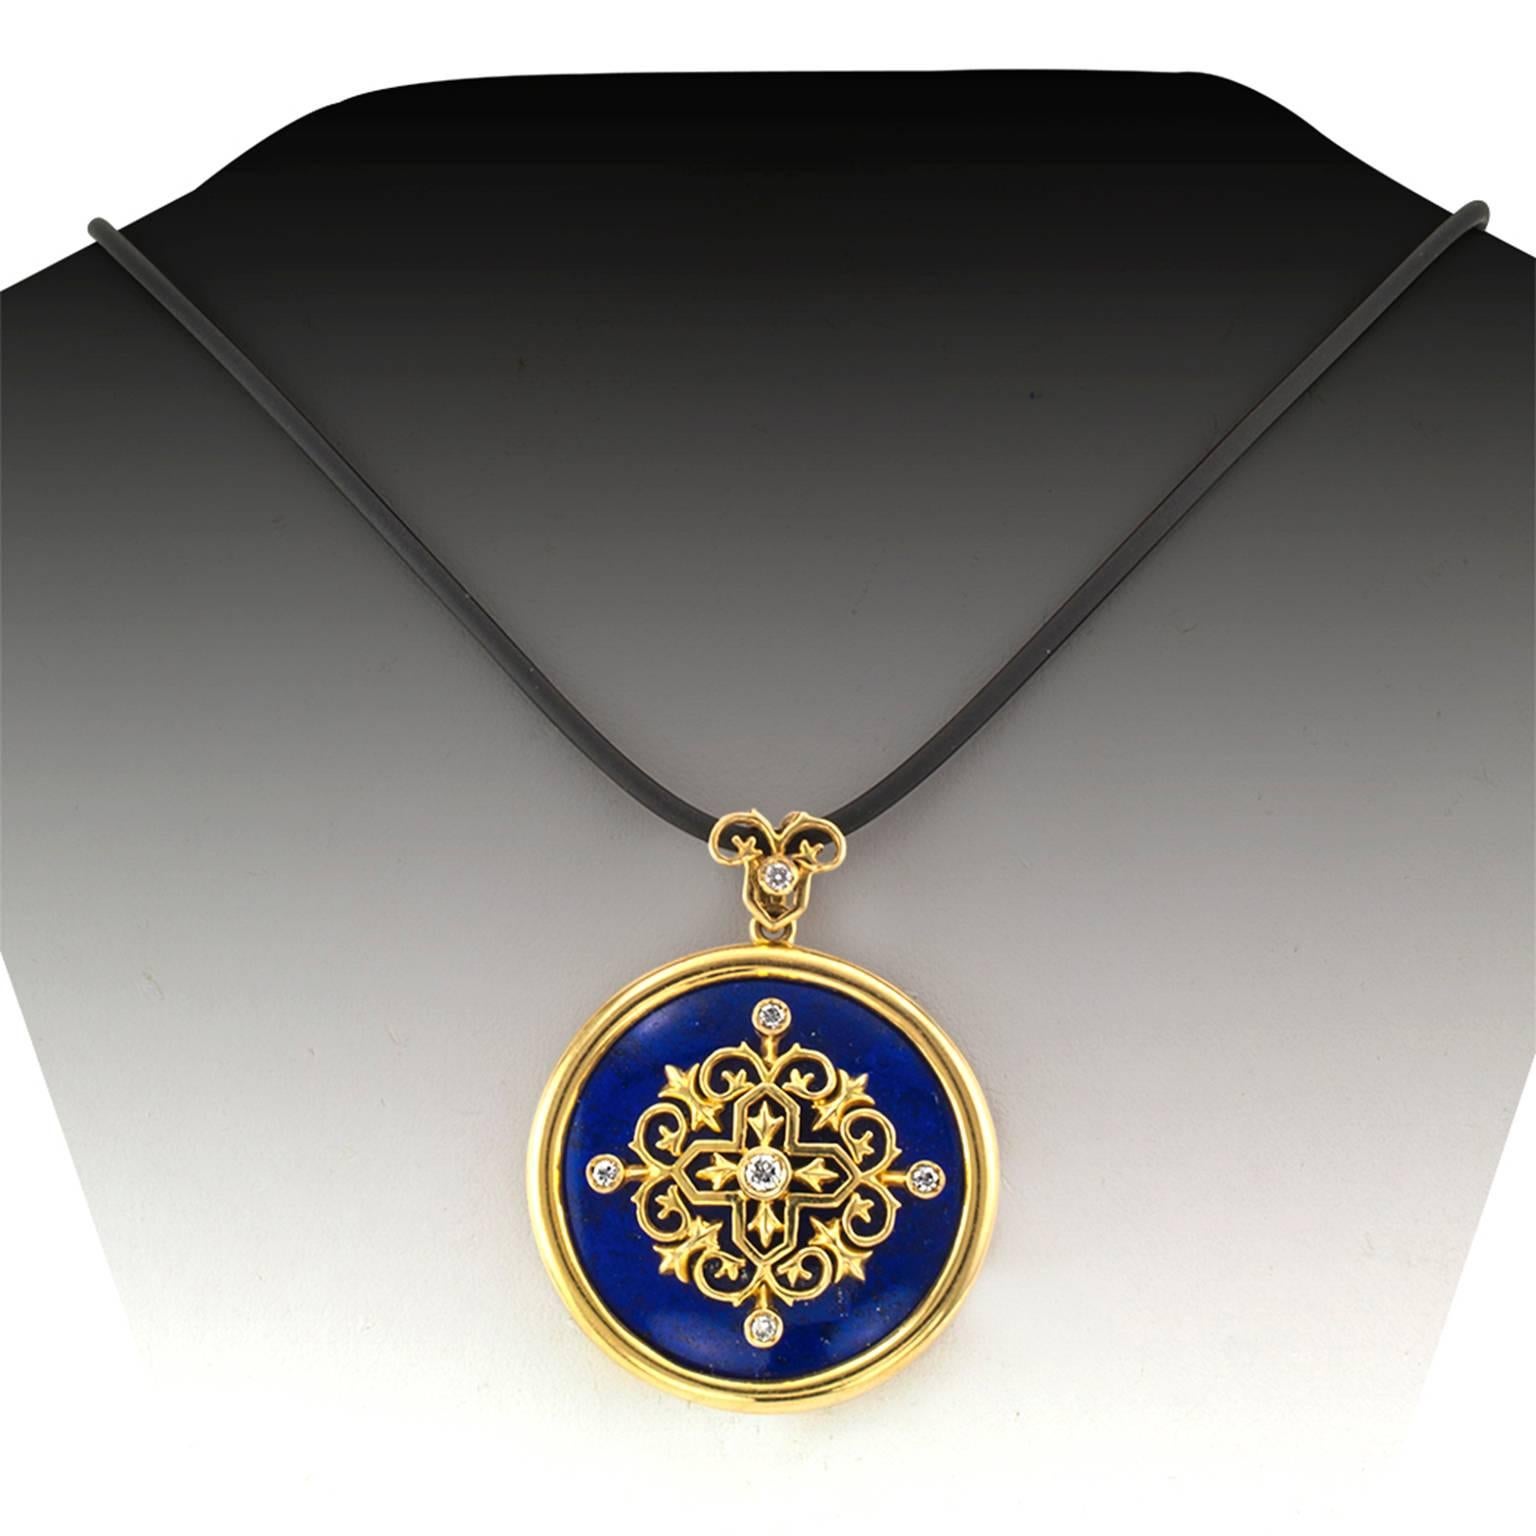 Ilias Lalaounis Estate Lapis and Diamond Gold Pendant

Care free and elegant, evoking a golden Byzantine effect upon the polished surface of the cool and lush, bezel-set  lapis lazuli, centering a similarly-set round diamond, the cardinal points